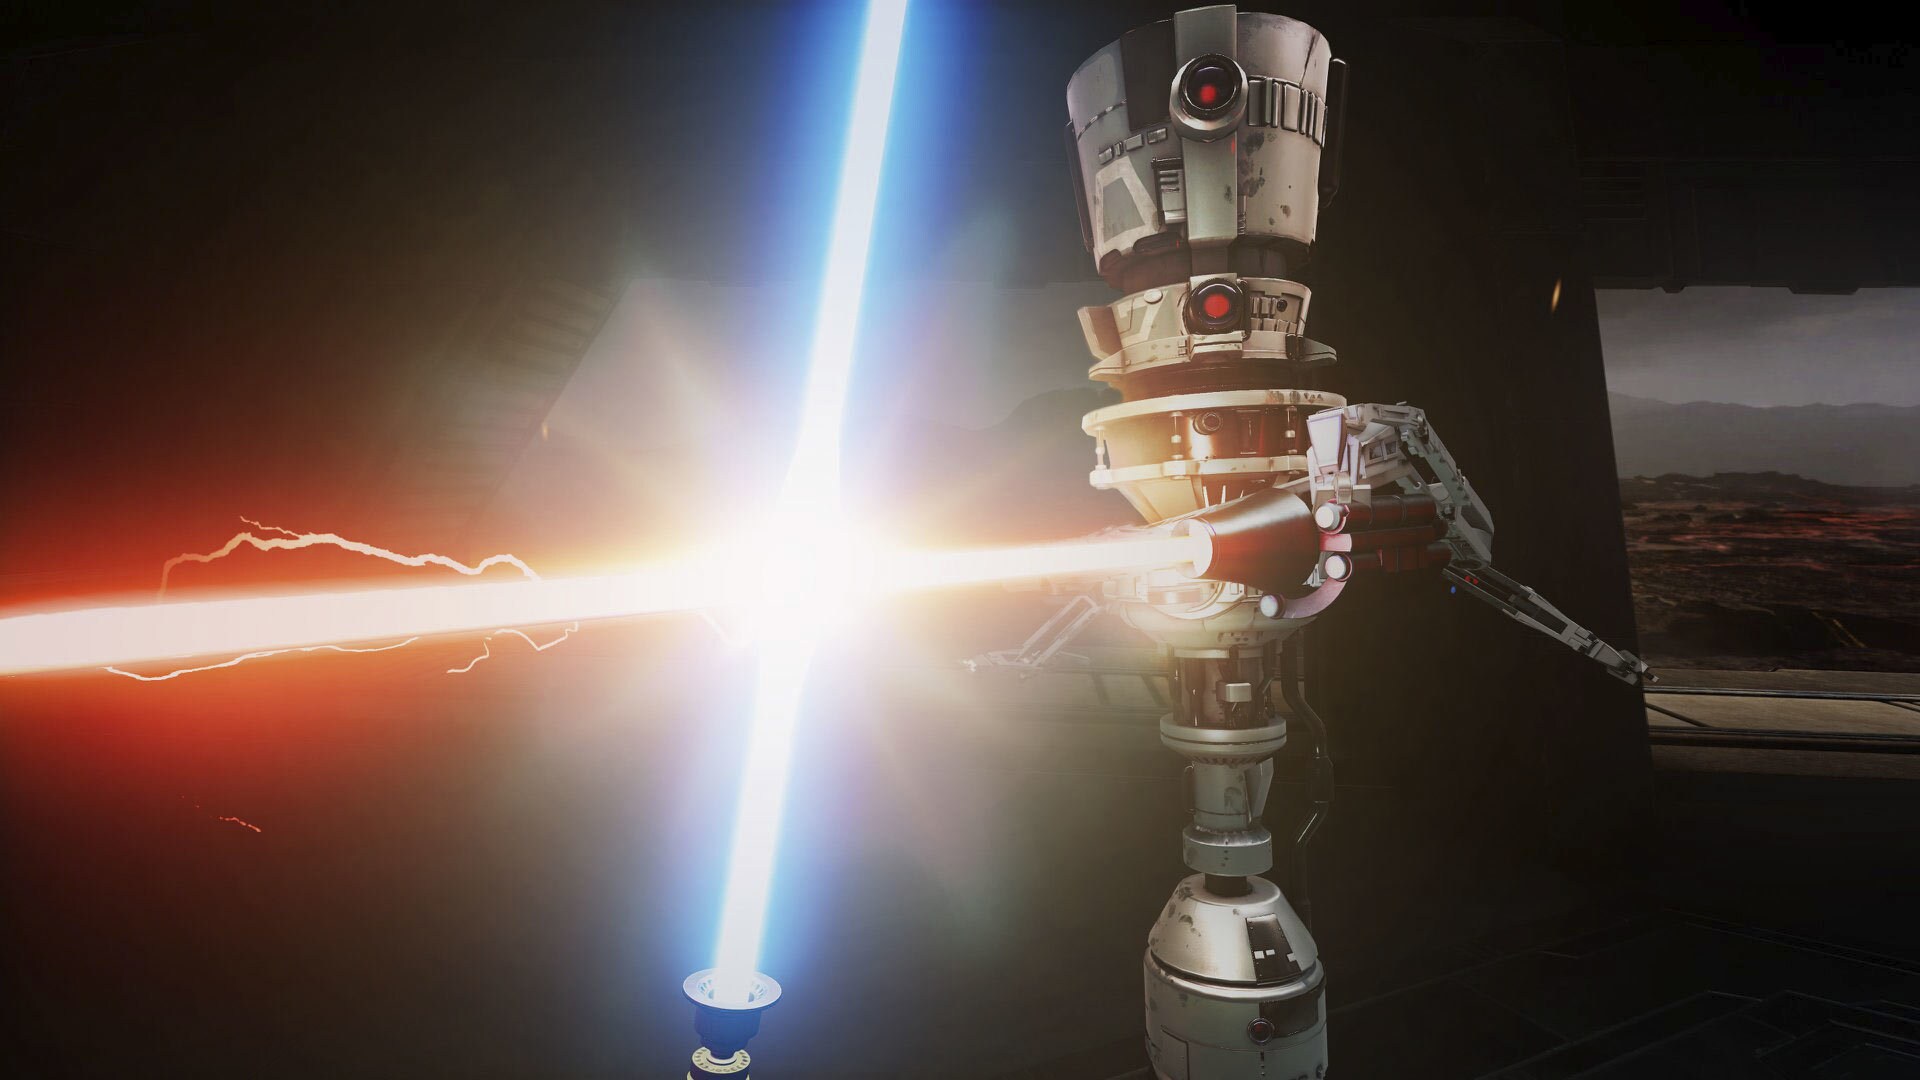 Hone your skills with the ancient weapon of the Jedi in Lightsaber Dojo, an extended, open-ended ...